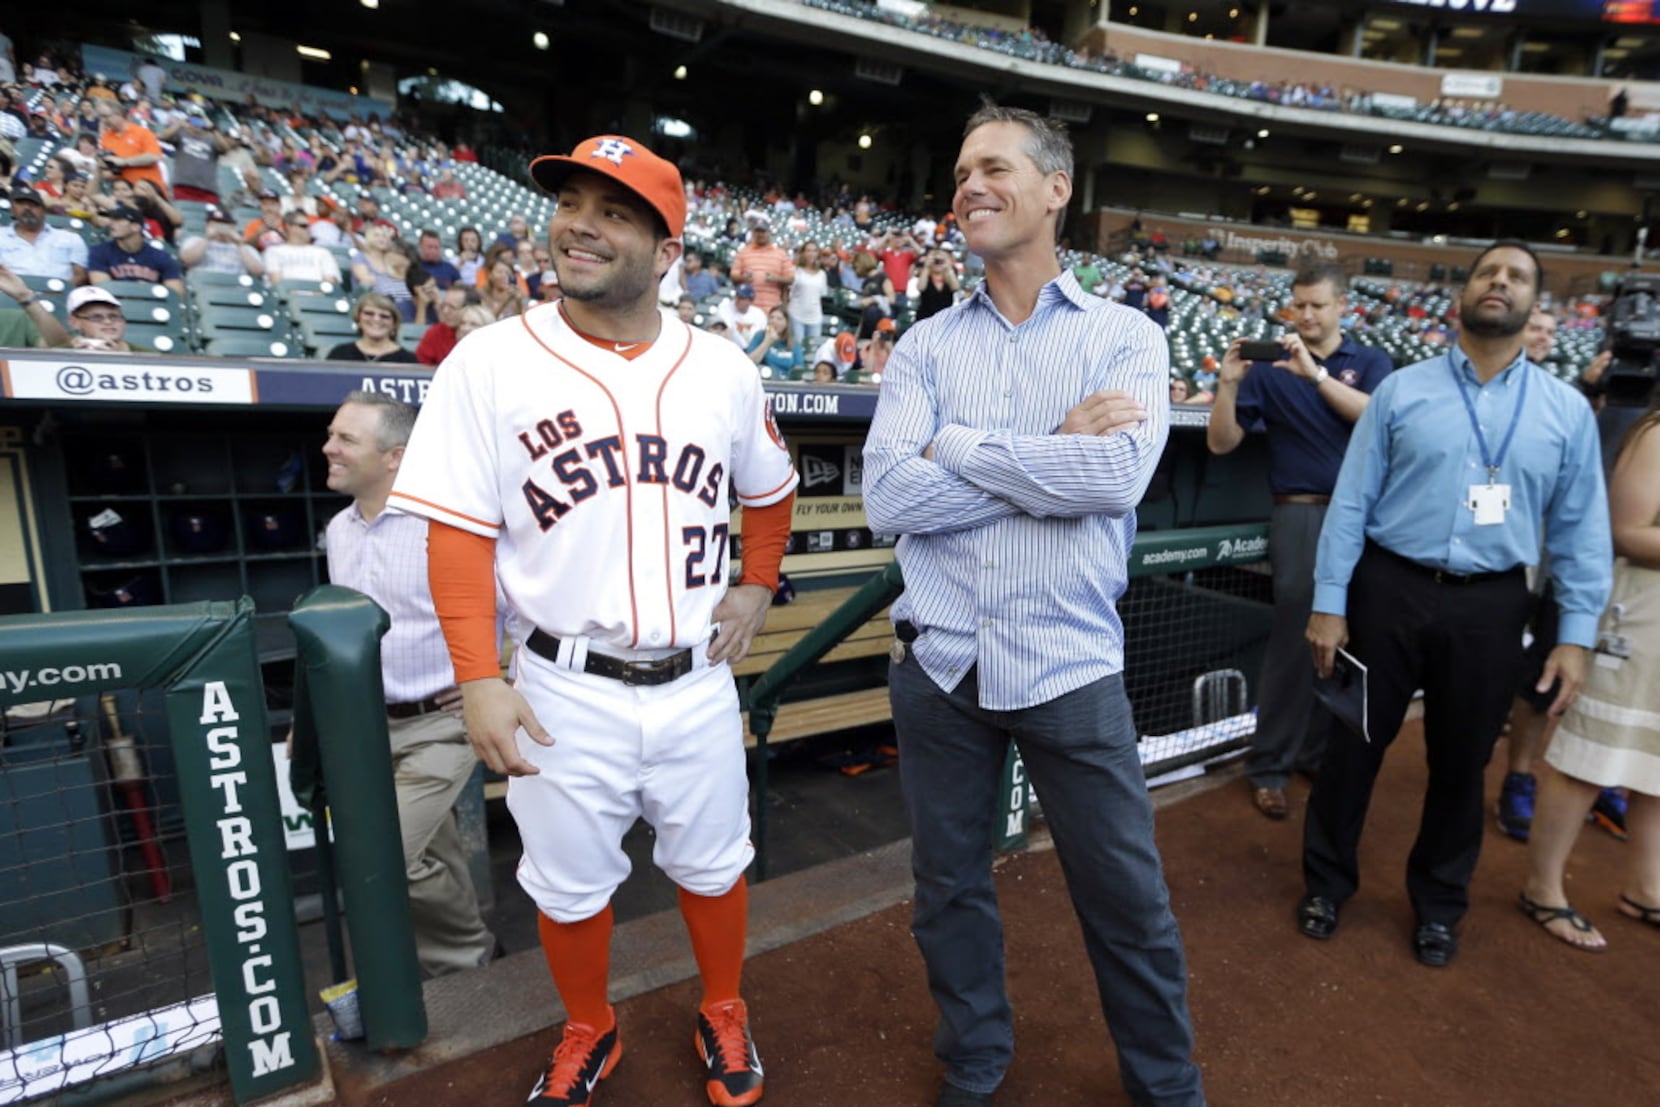 Biggio on being elected into Hall of Fame: Astros fans 'deserve' this